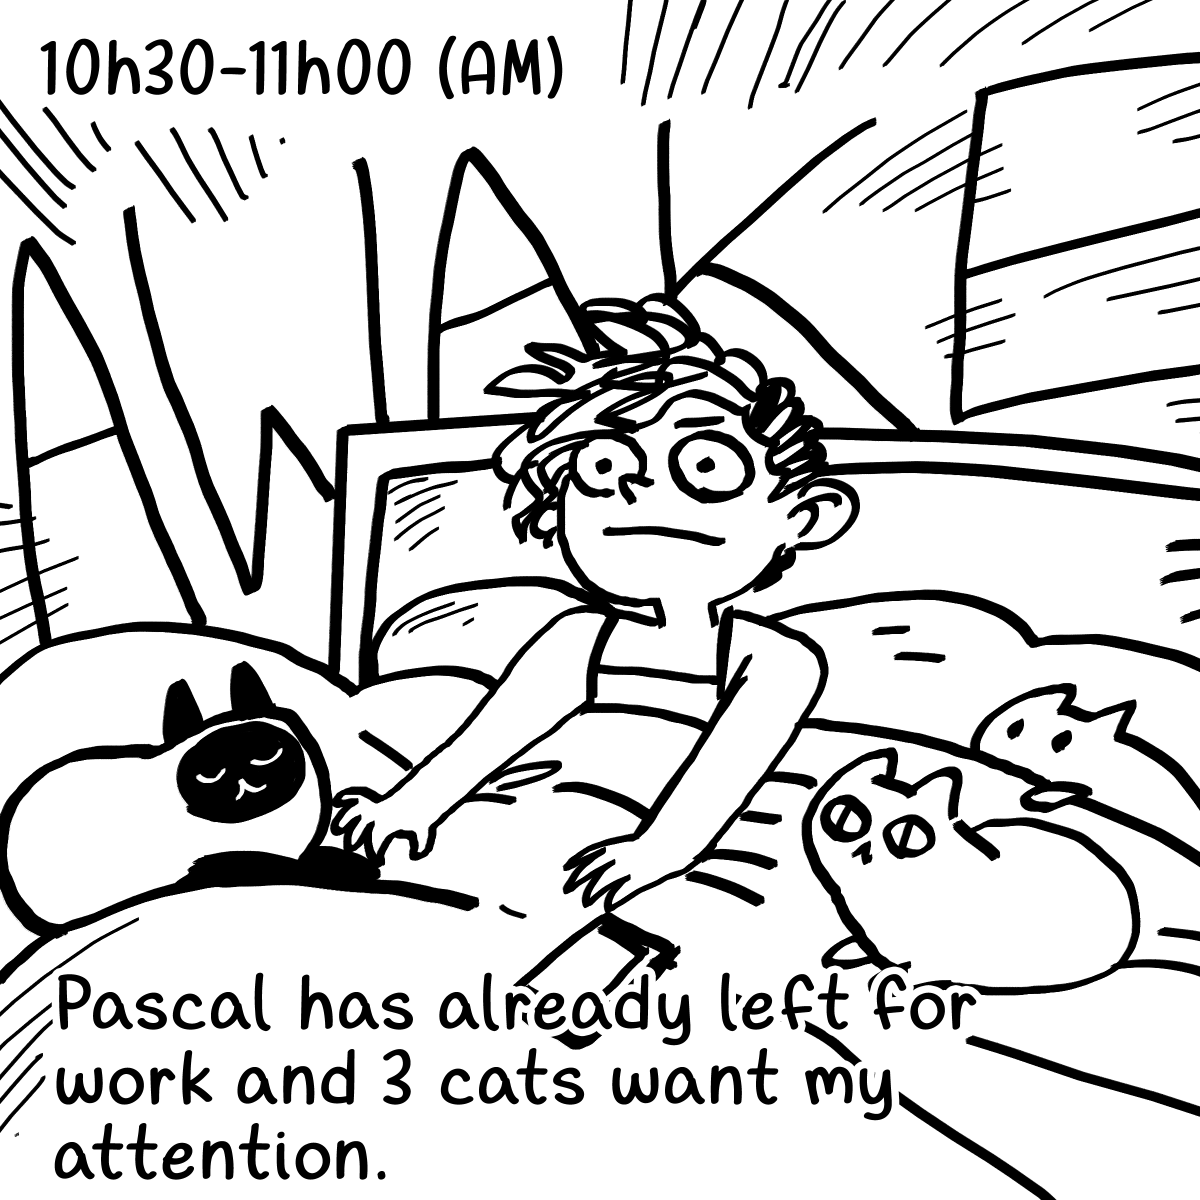 It's time for some TIME.

#hourlycomicday #HourlyComicDay2023 